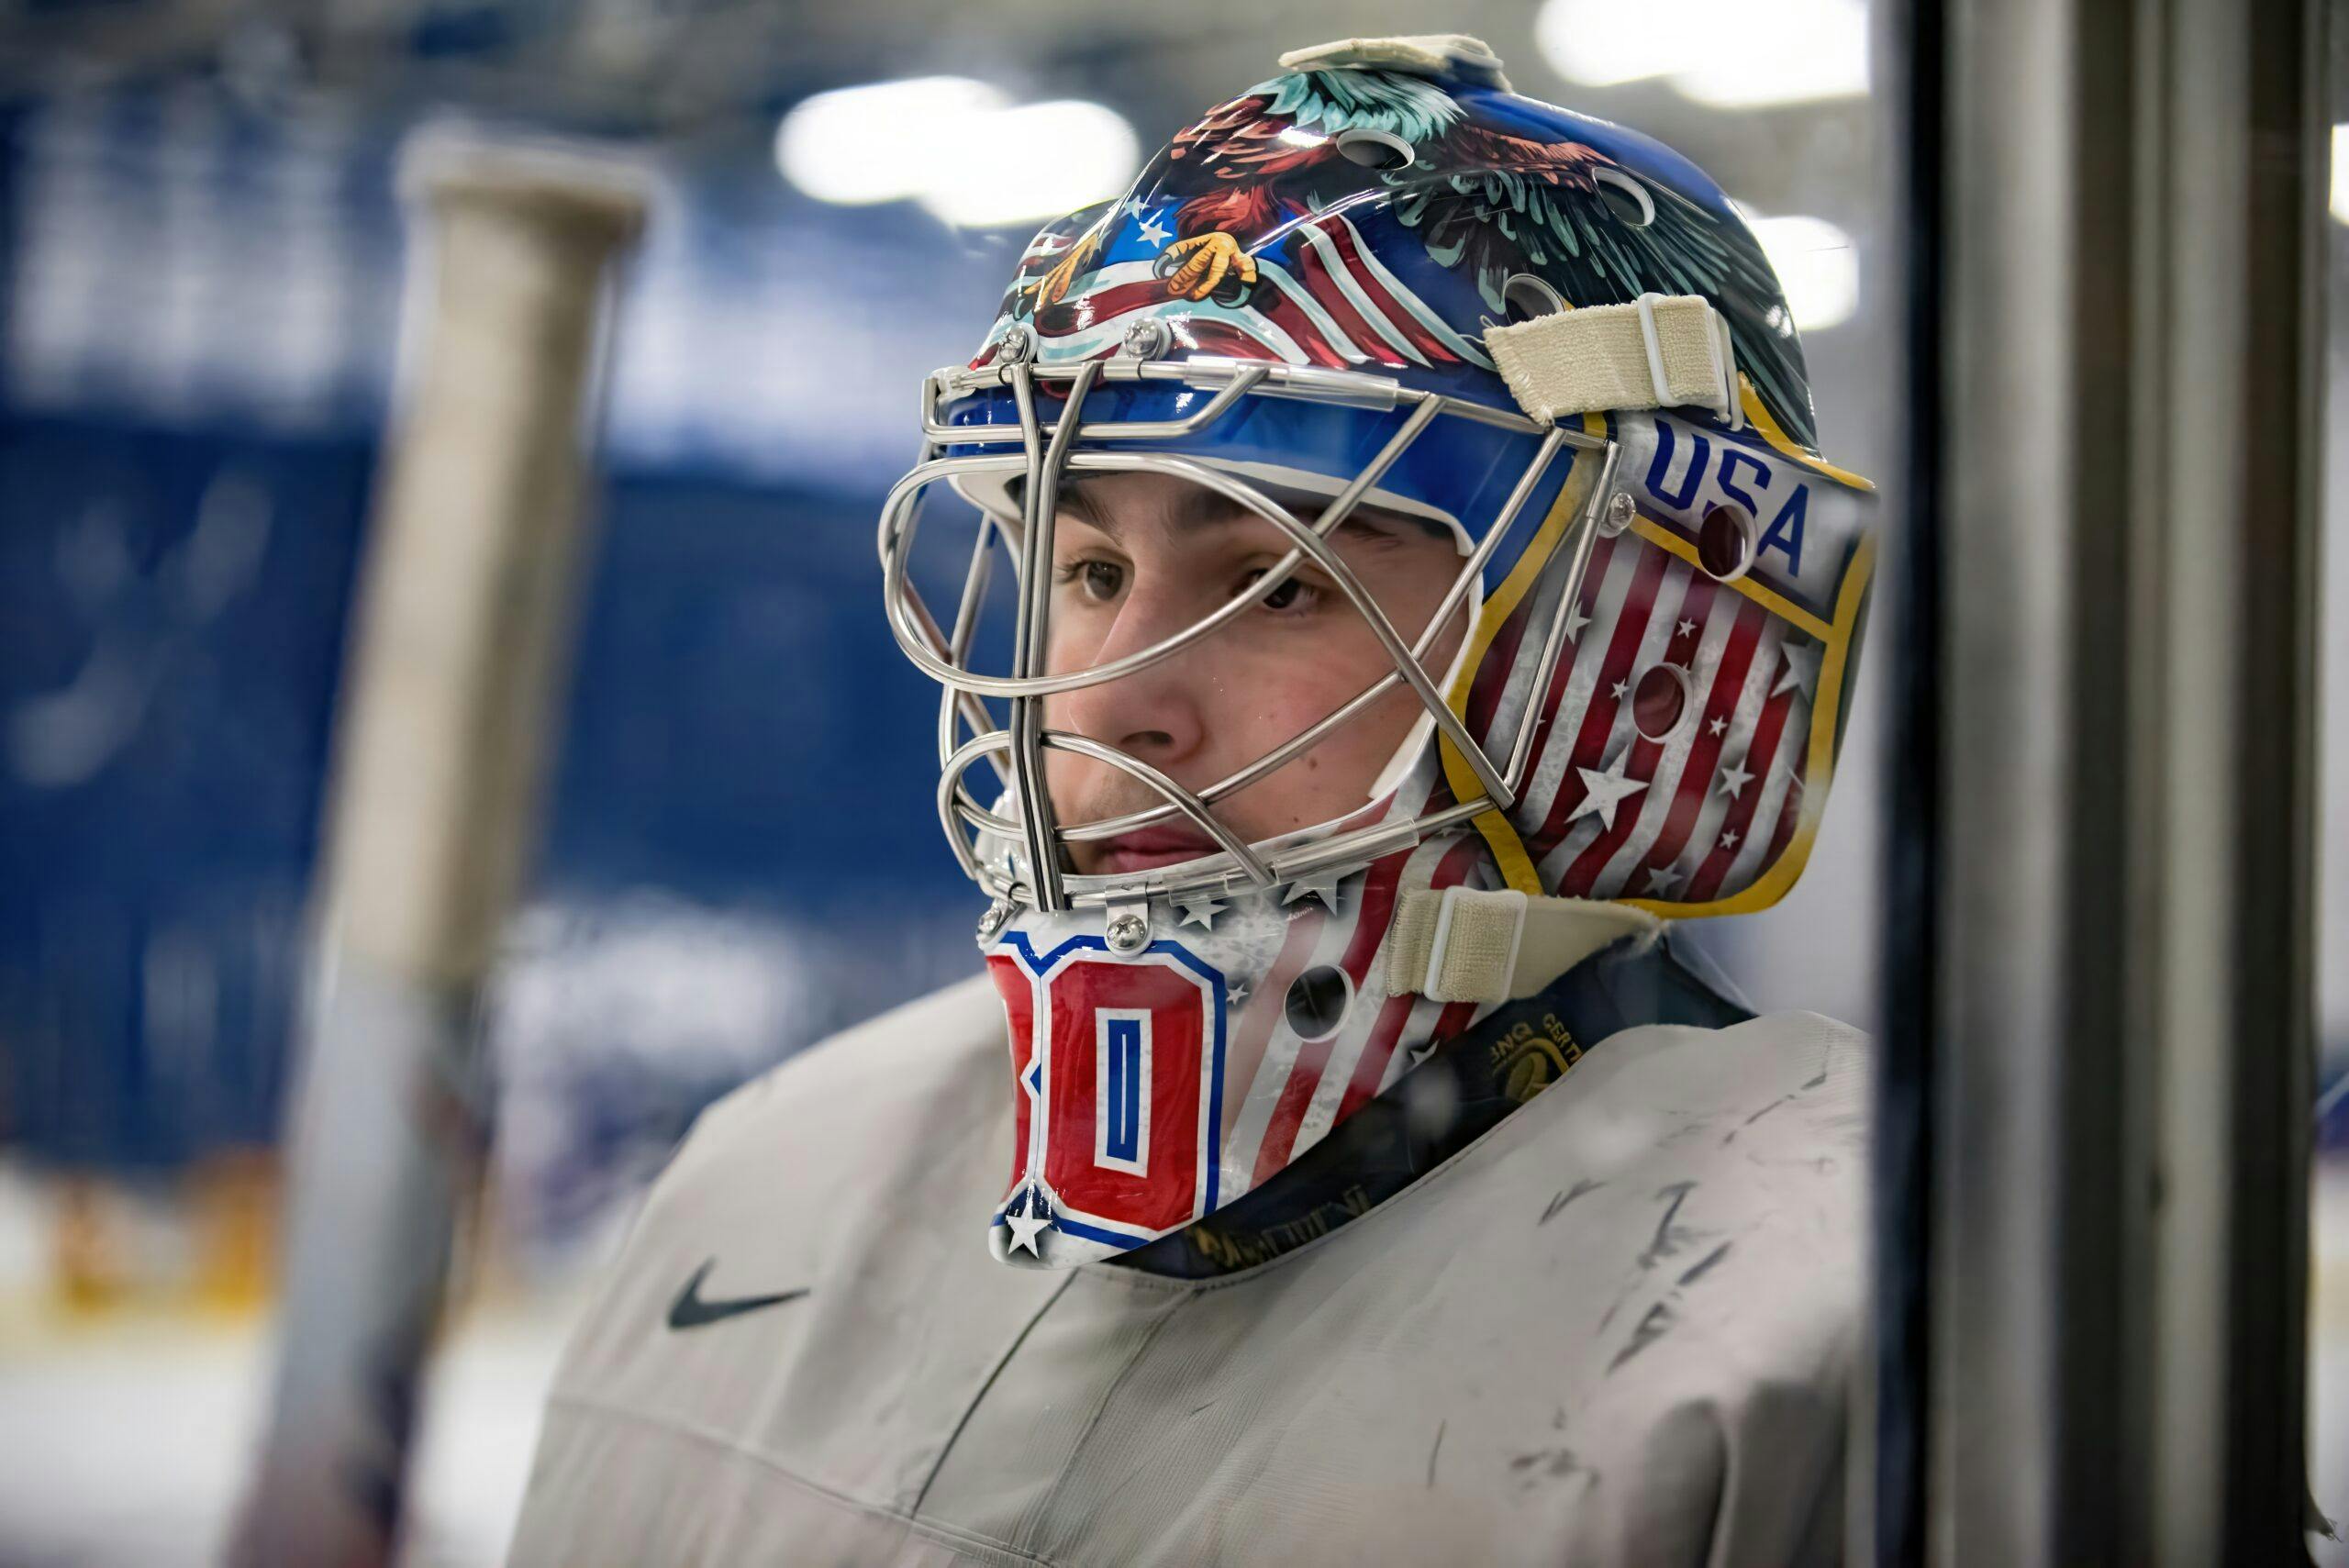 From Jr. C to world juniors, Sam Hillebrandt isn’t taking USA opportunity for granted